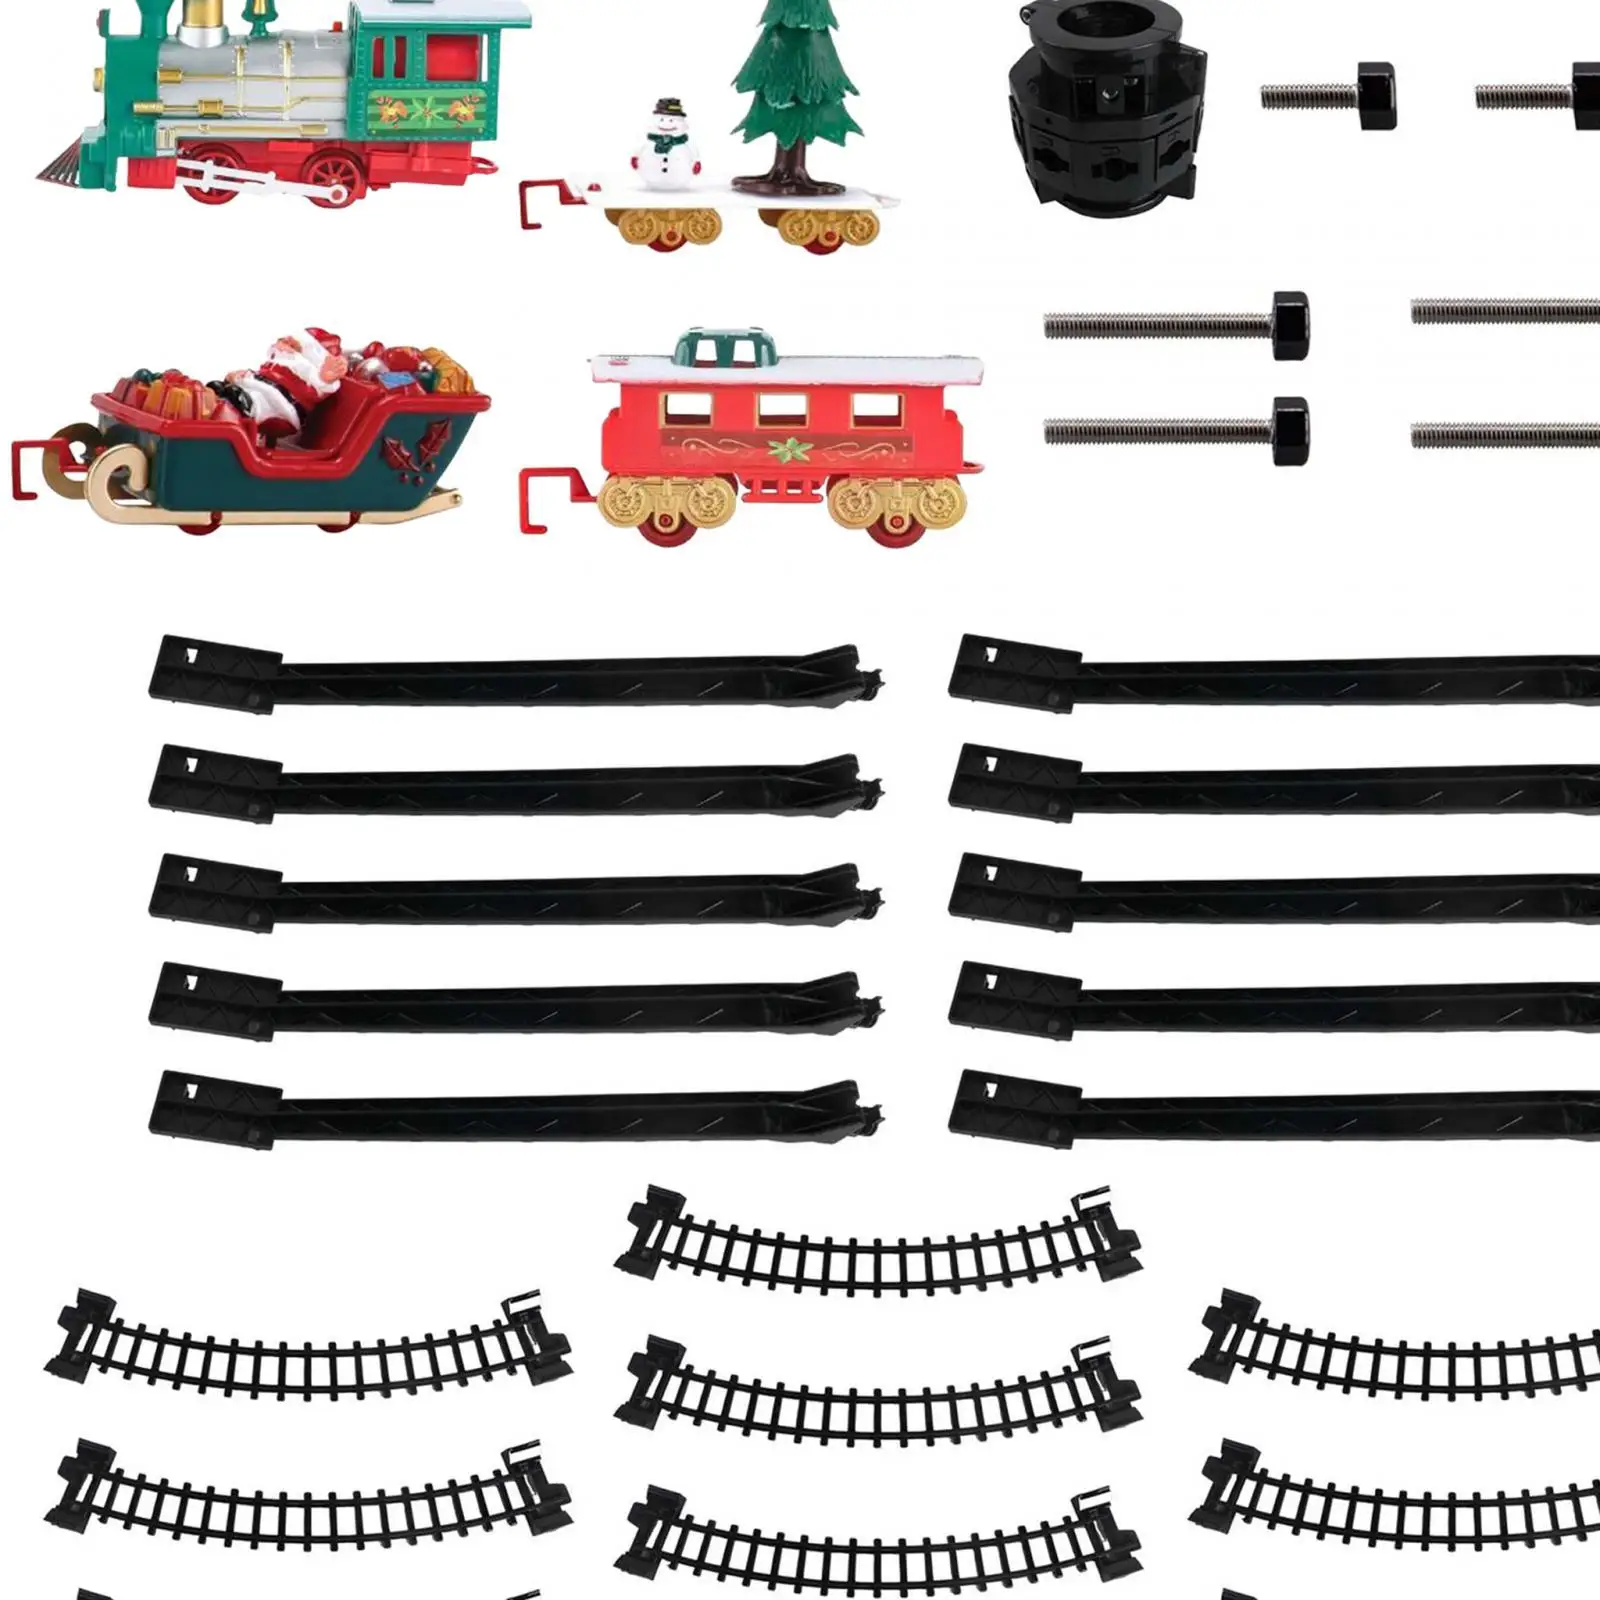 Christmas Train Sets for Around The Tree for Children Ages 3 4 5 6 Gifts